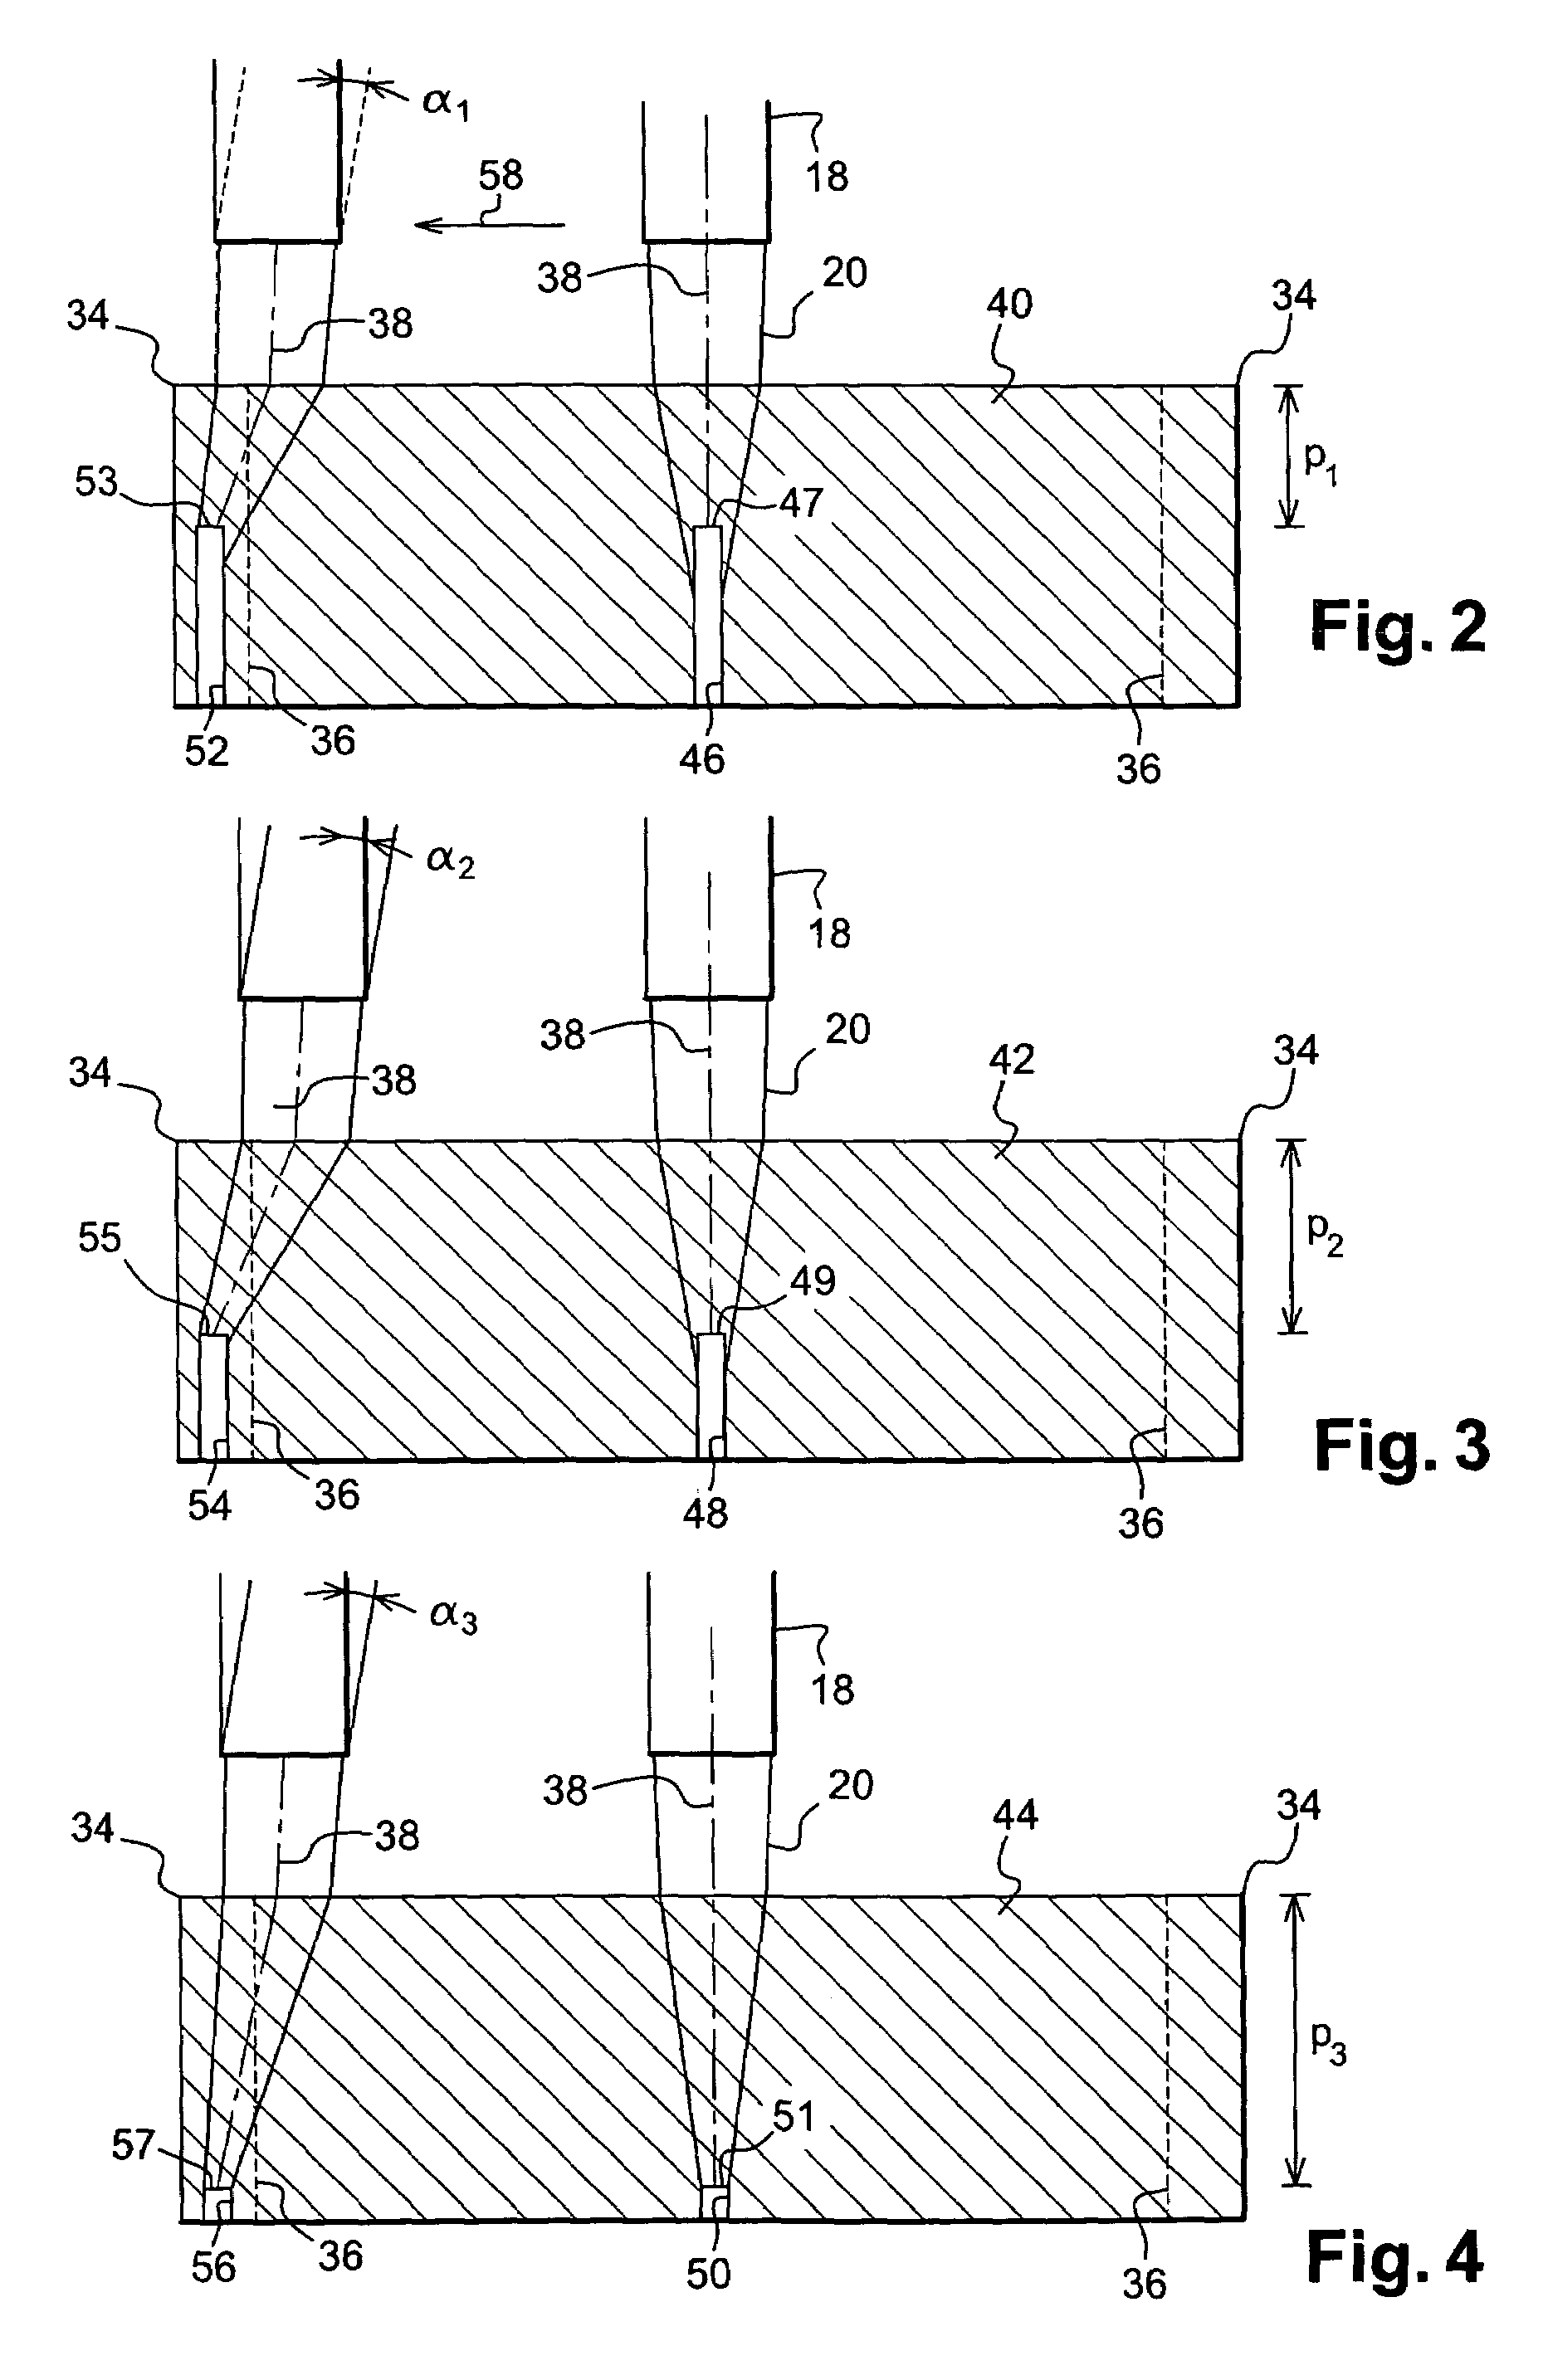 Method of using ultrasound to inspect a part in immersion